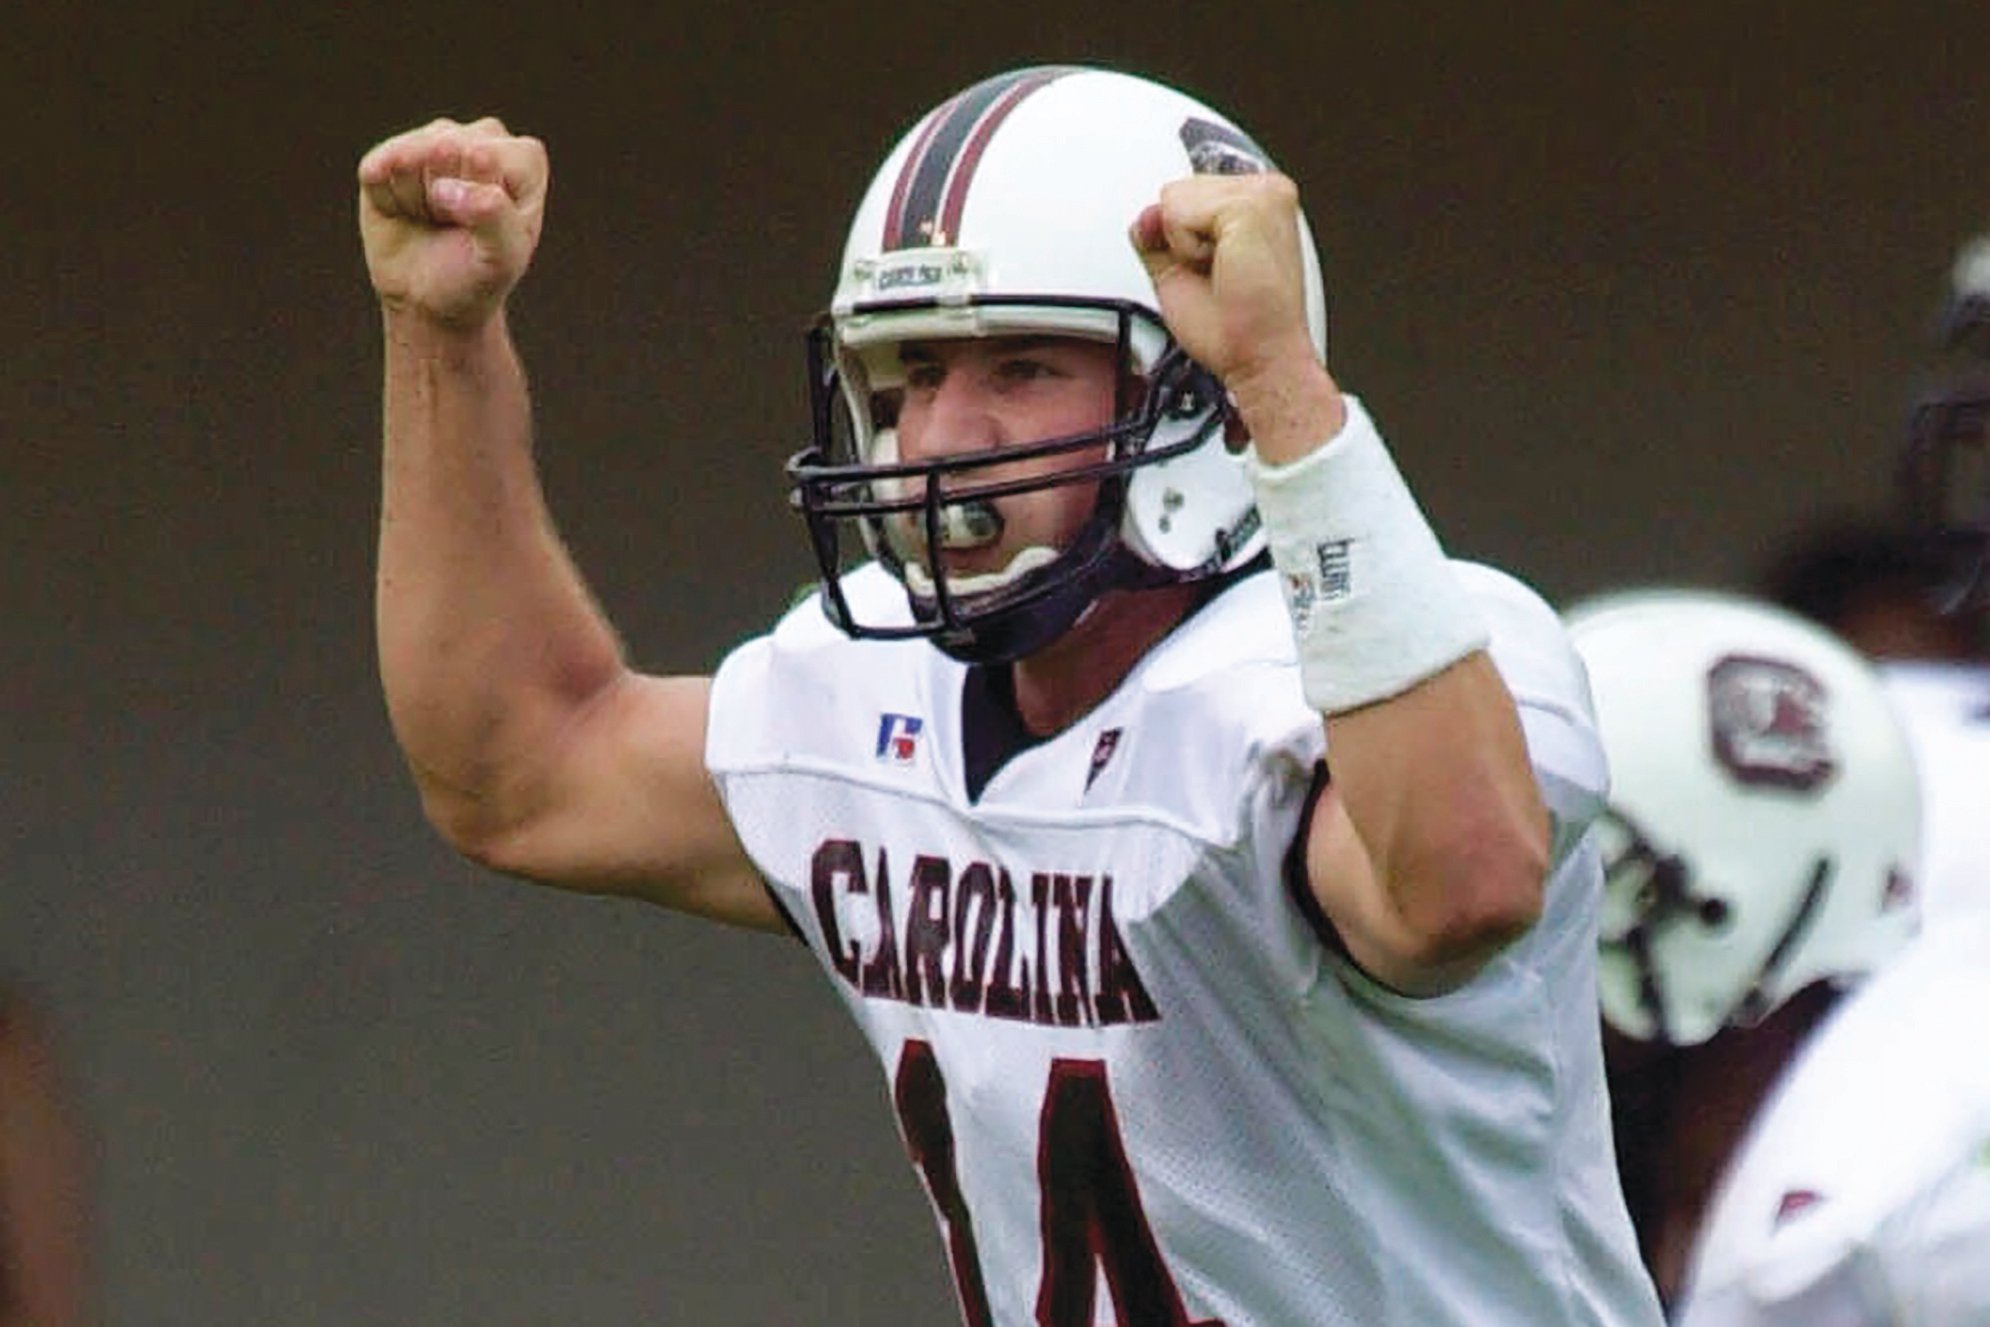 Former South Carolina quarterback Phil Pettyy, who led Lou Holtz's teams to two Outback Bowl wins has died at age 43.